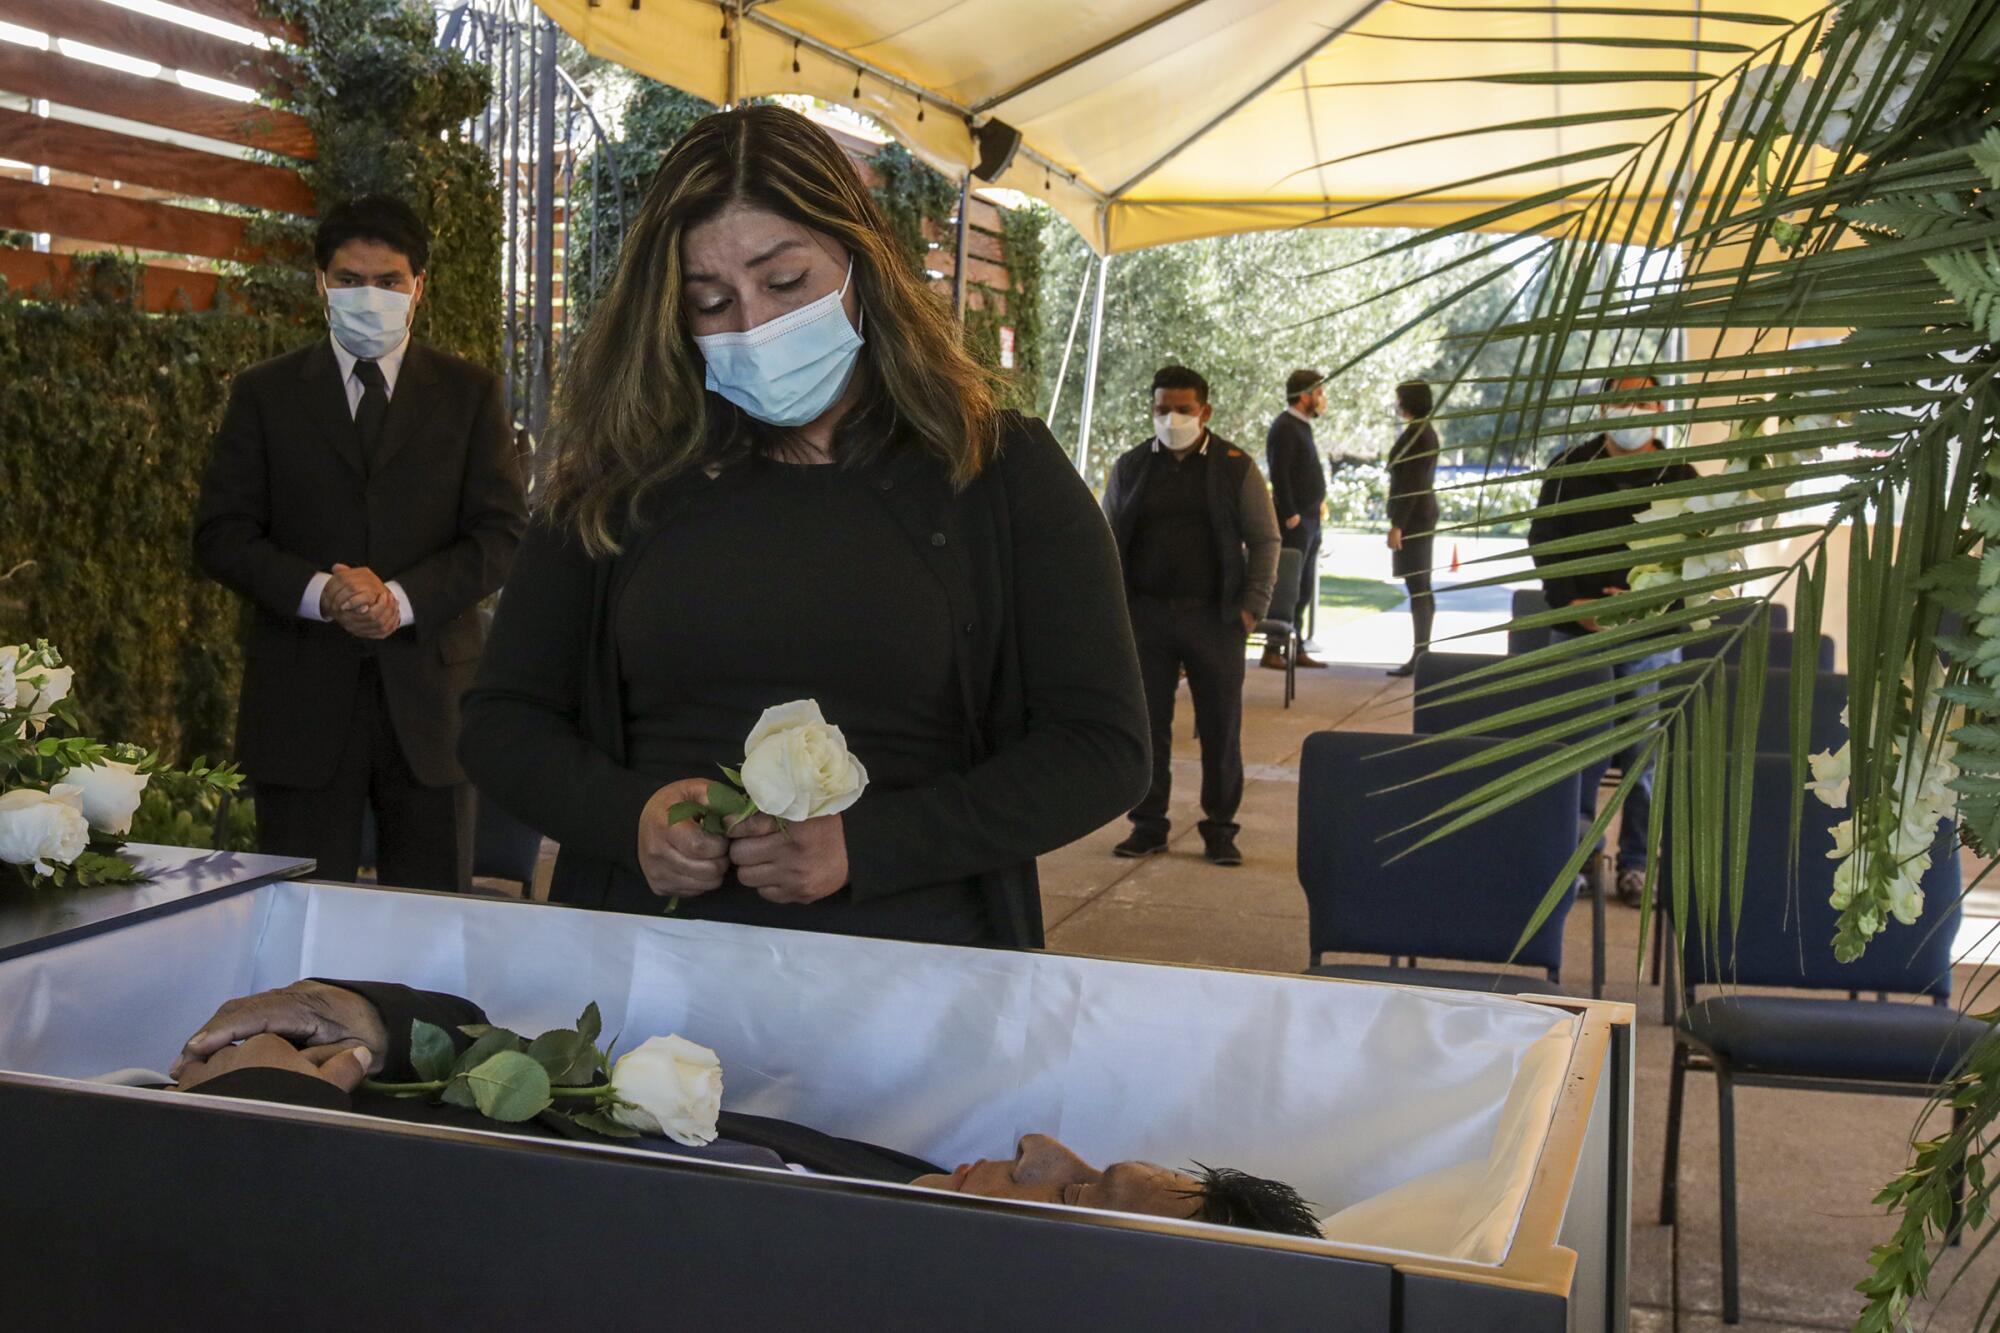 A woman wearing a face mask holds a white rose beside a man's open casket as other mourners wait under an outdoor canopy